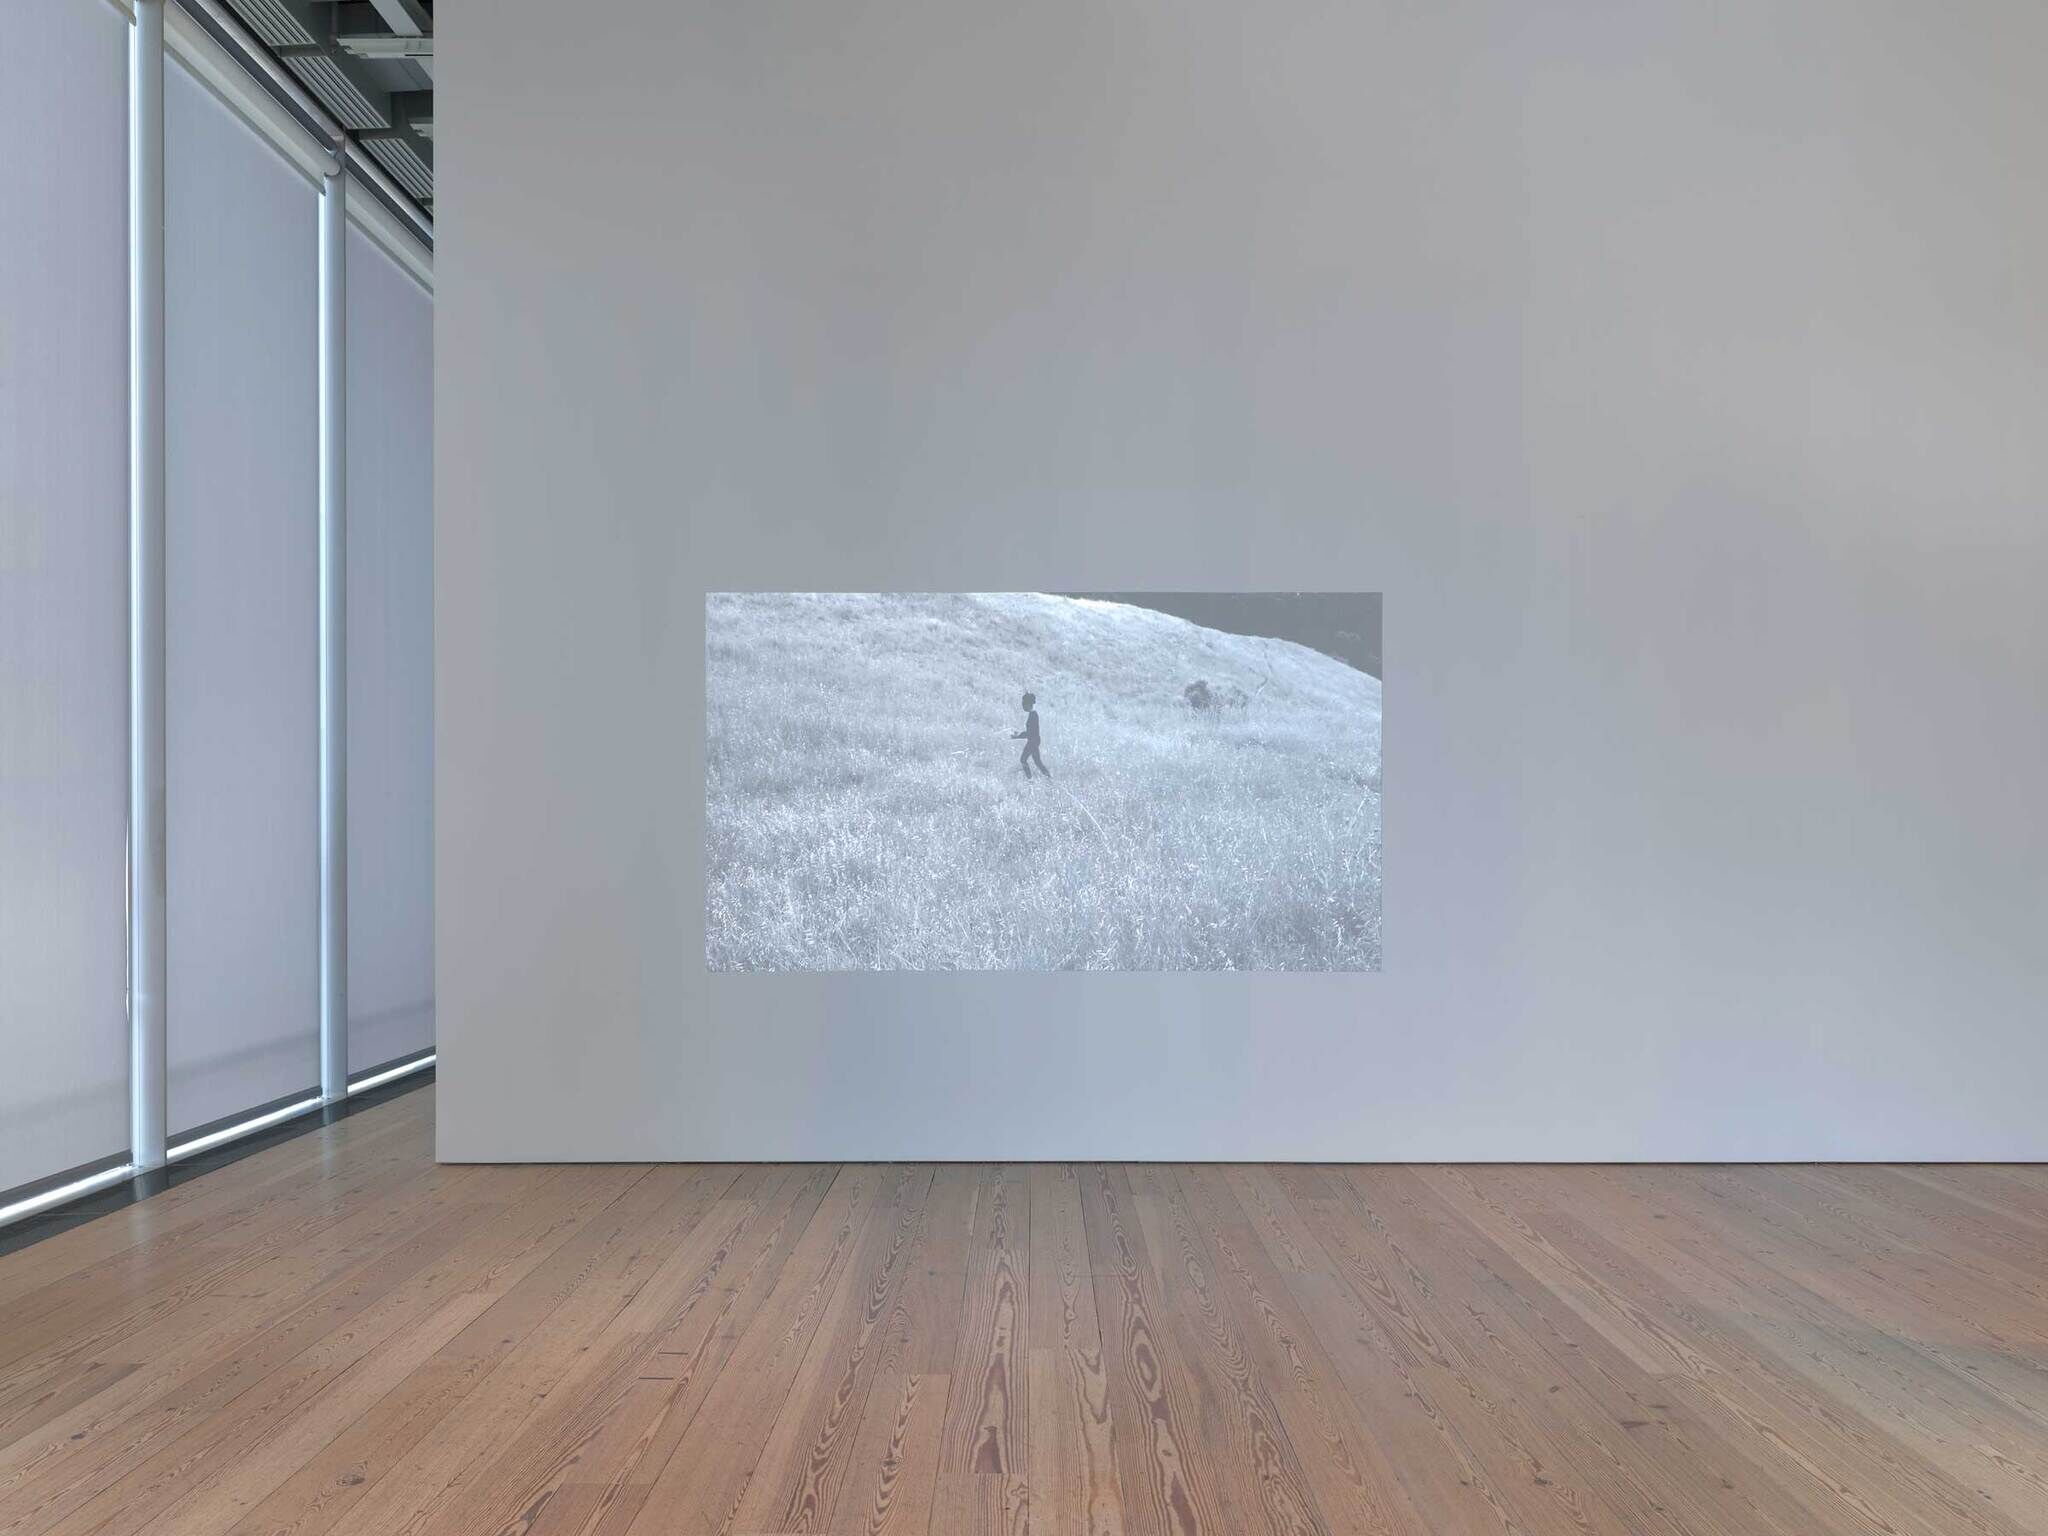 A monochrome photo of a lone figure in a field displayed in a modern gallery with wooden floors and white walls.